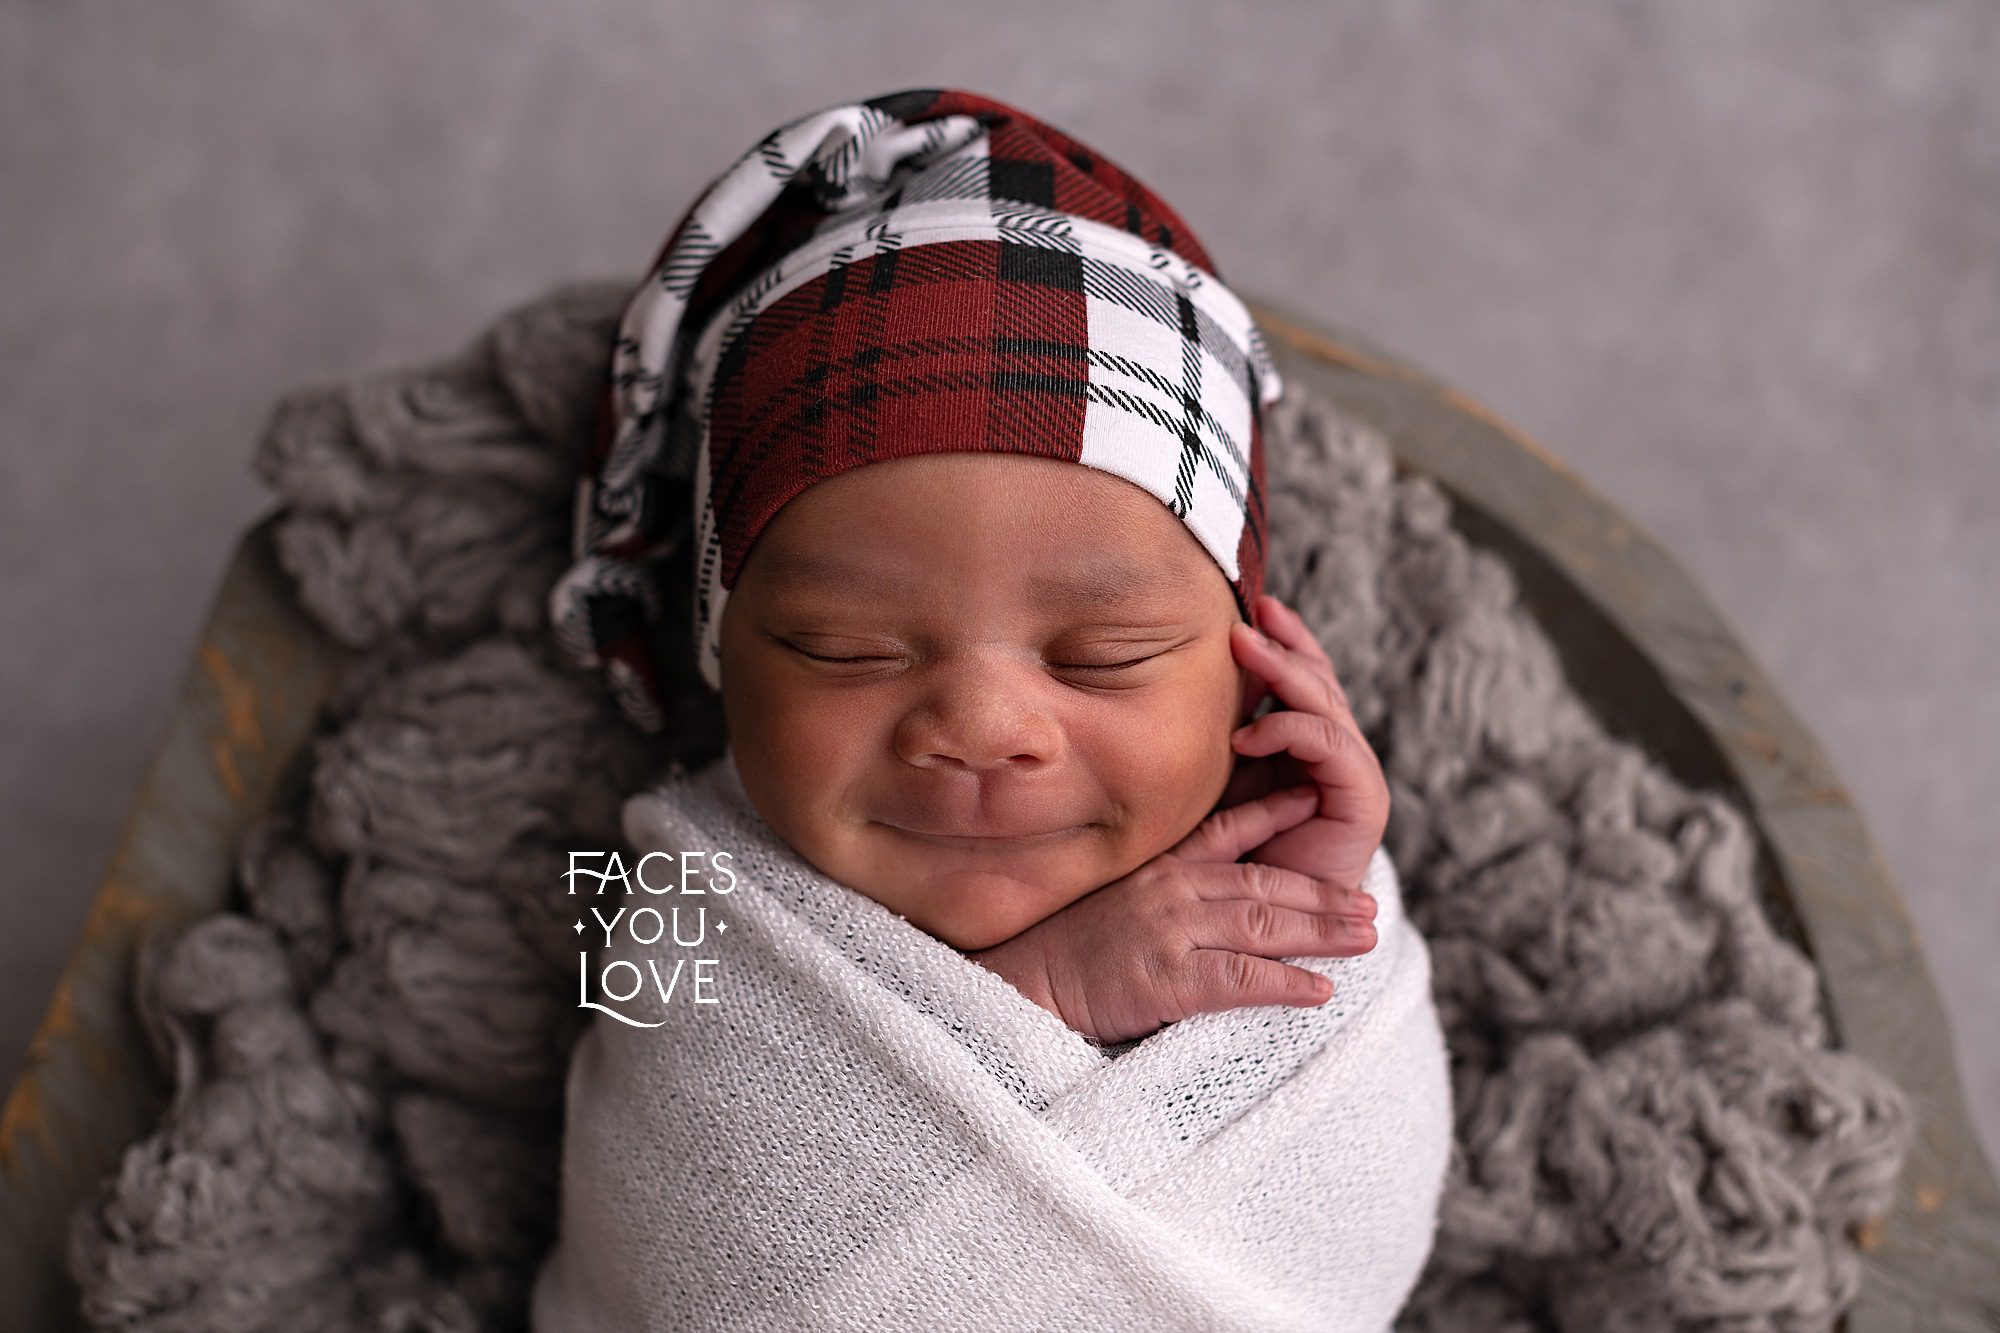 Smiling newborn baby, wearing a red, white, and black stocking cap, wrapped in a white wrap, and laying on gray fluff in a wooden gray bowl. Photographed by Helen Ransom of Faces You Love Photography.